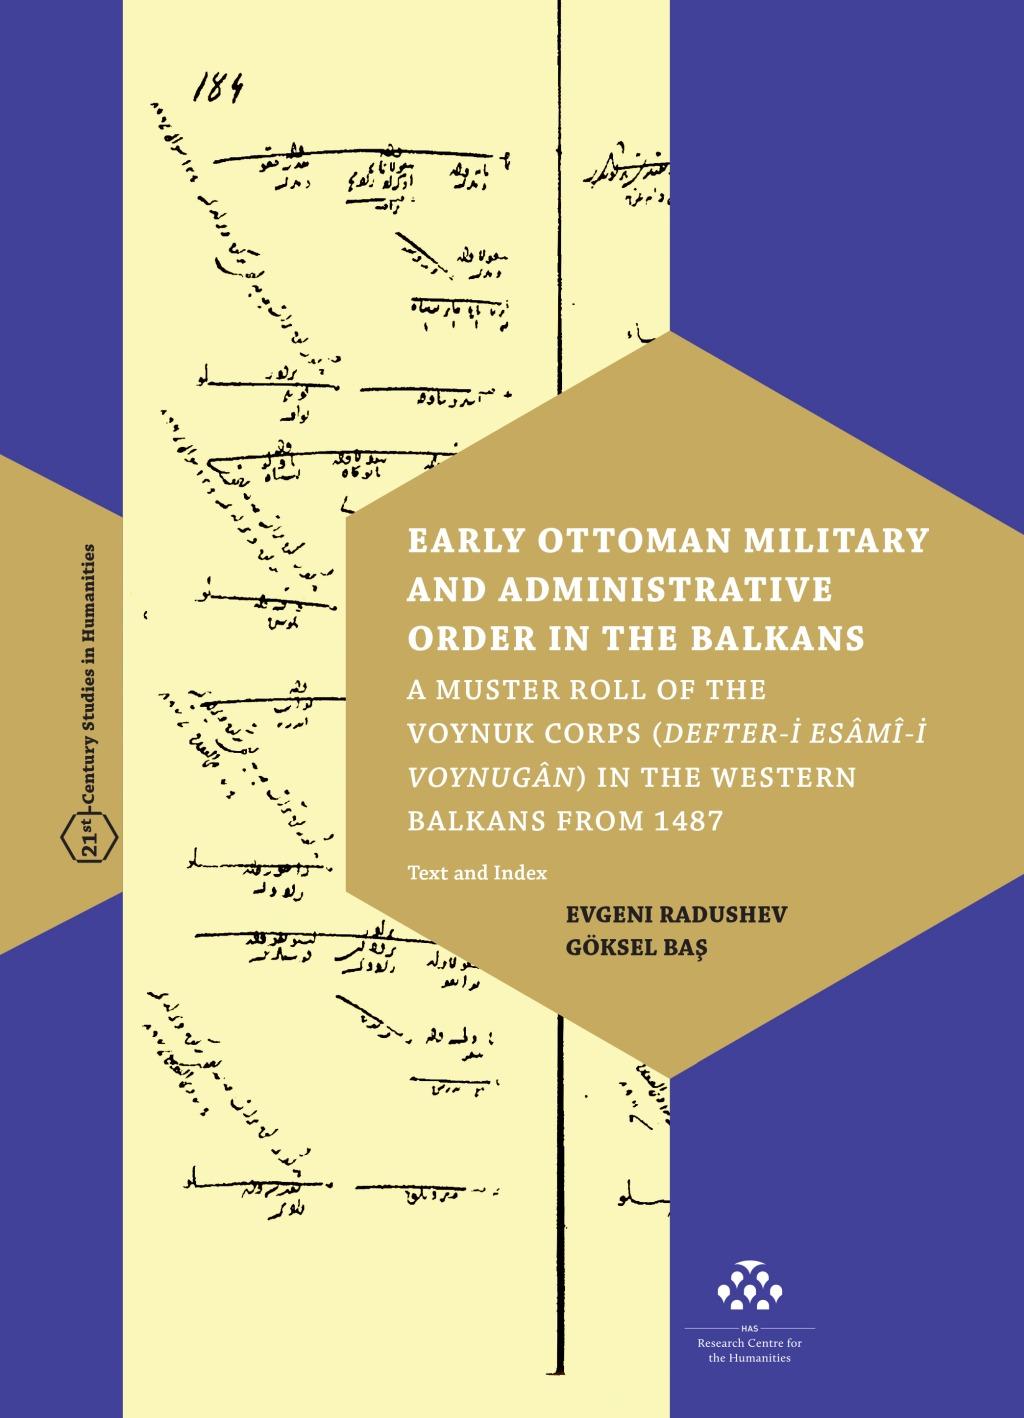 Evgeni Radushev - Göksel Baº - Early Ottoman Military and Administrative Order in the Balkans - A Muster Roll of the Voynuk Corps (Defter-i Esâmî-i Voynugân) in the Western Balkans